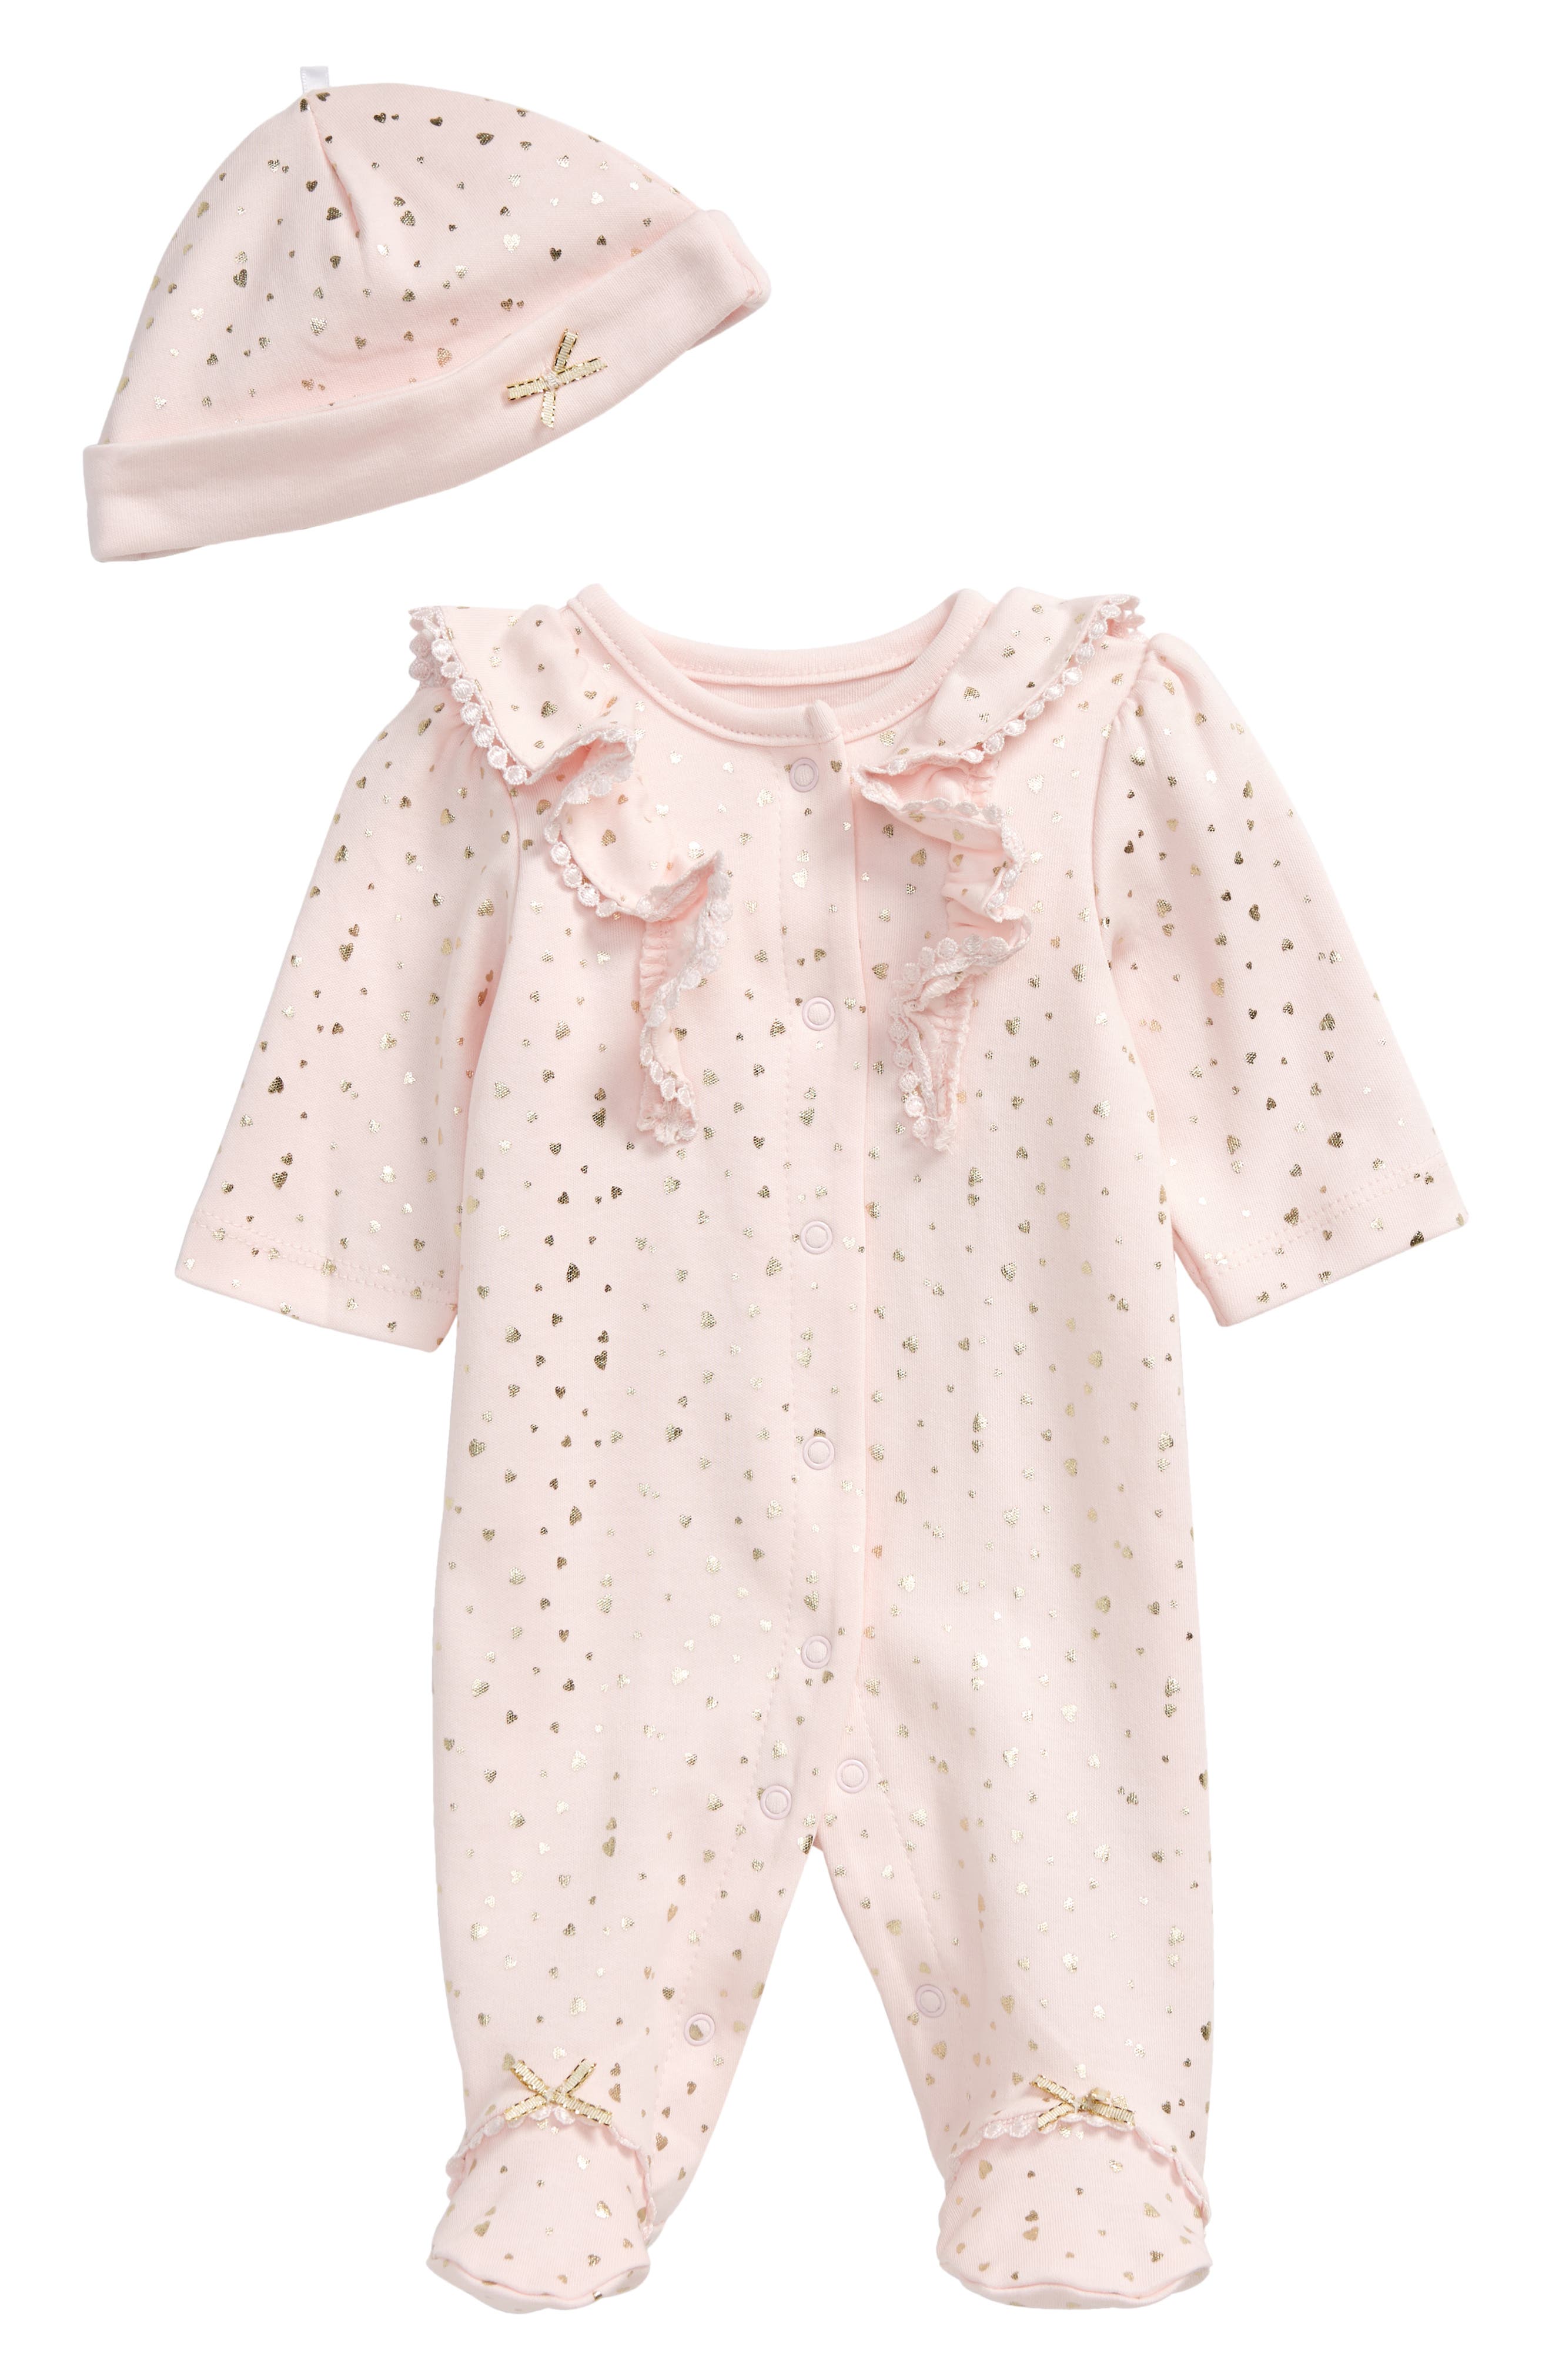 baby girls clothing stores